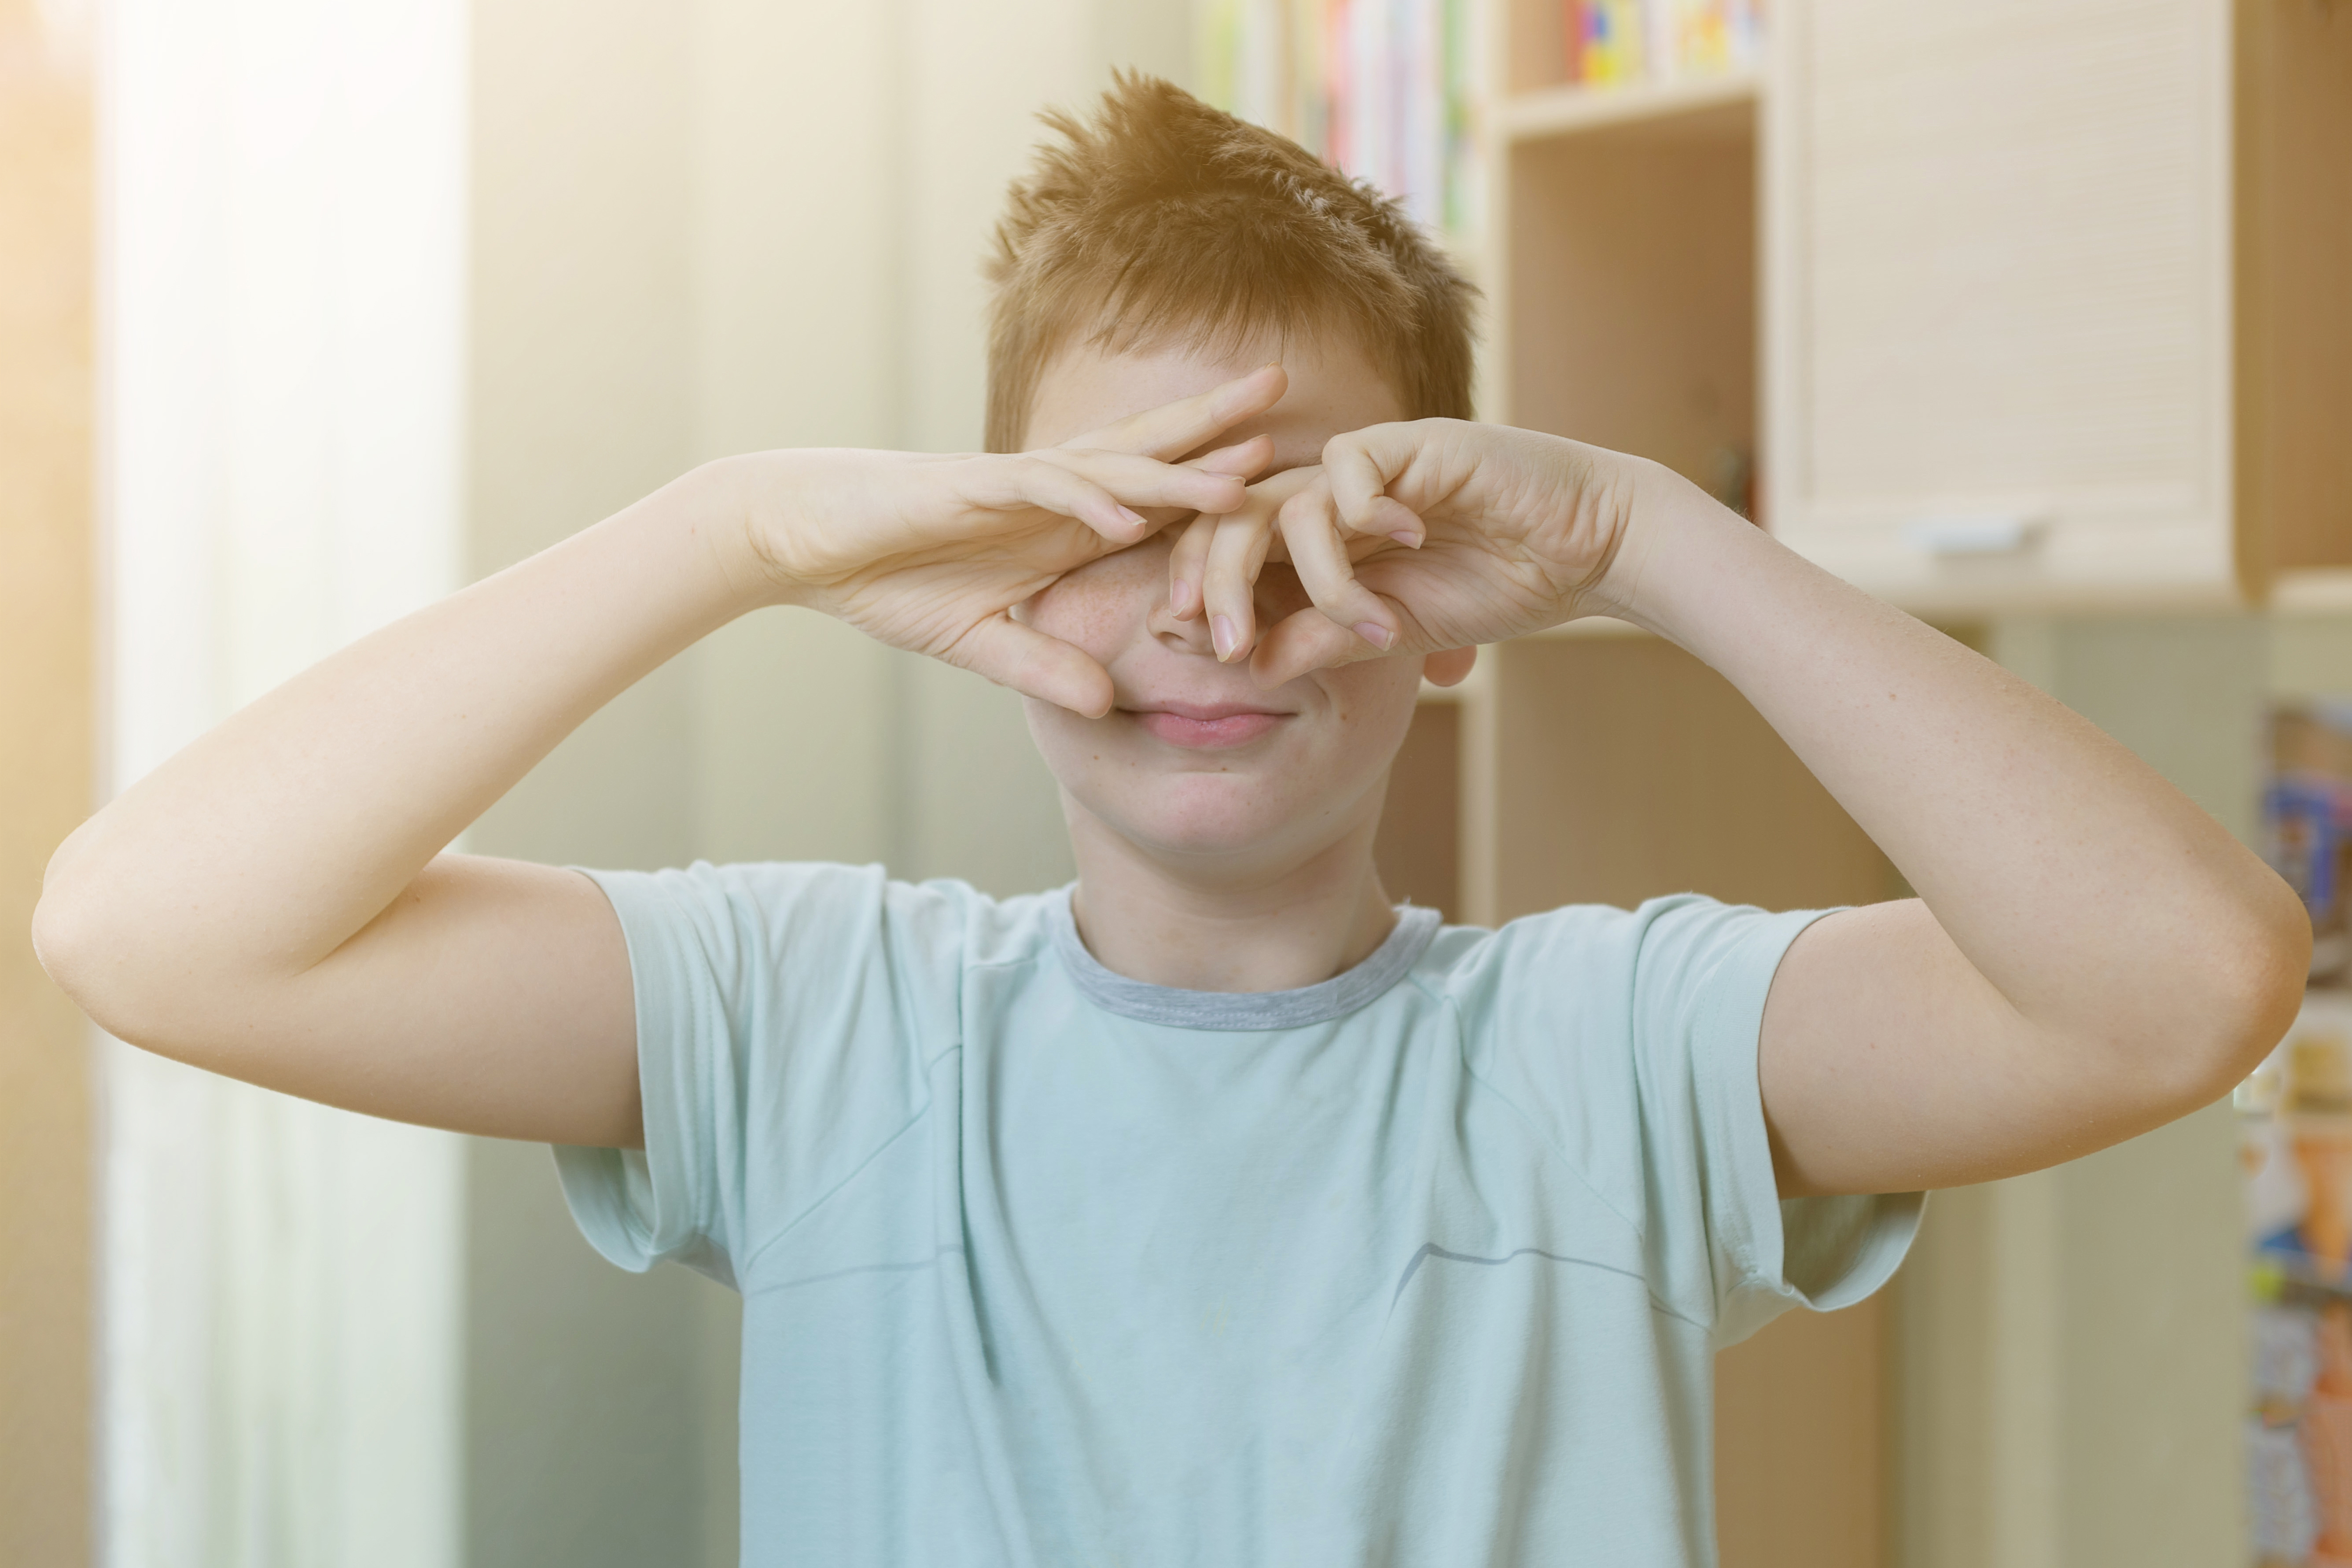 A teenager boy woke up in the morning, is in his room, rubs his eyes. | Source: Shutterstock